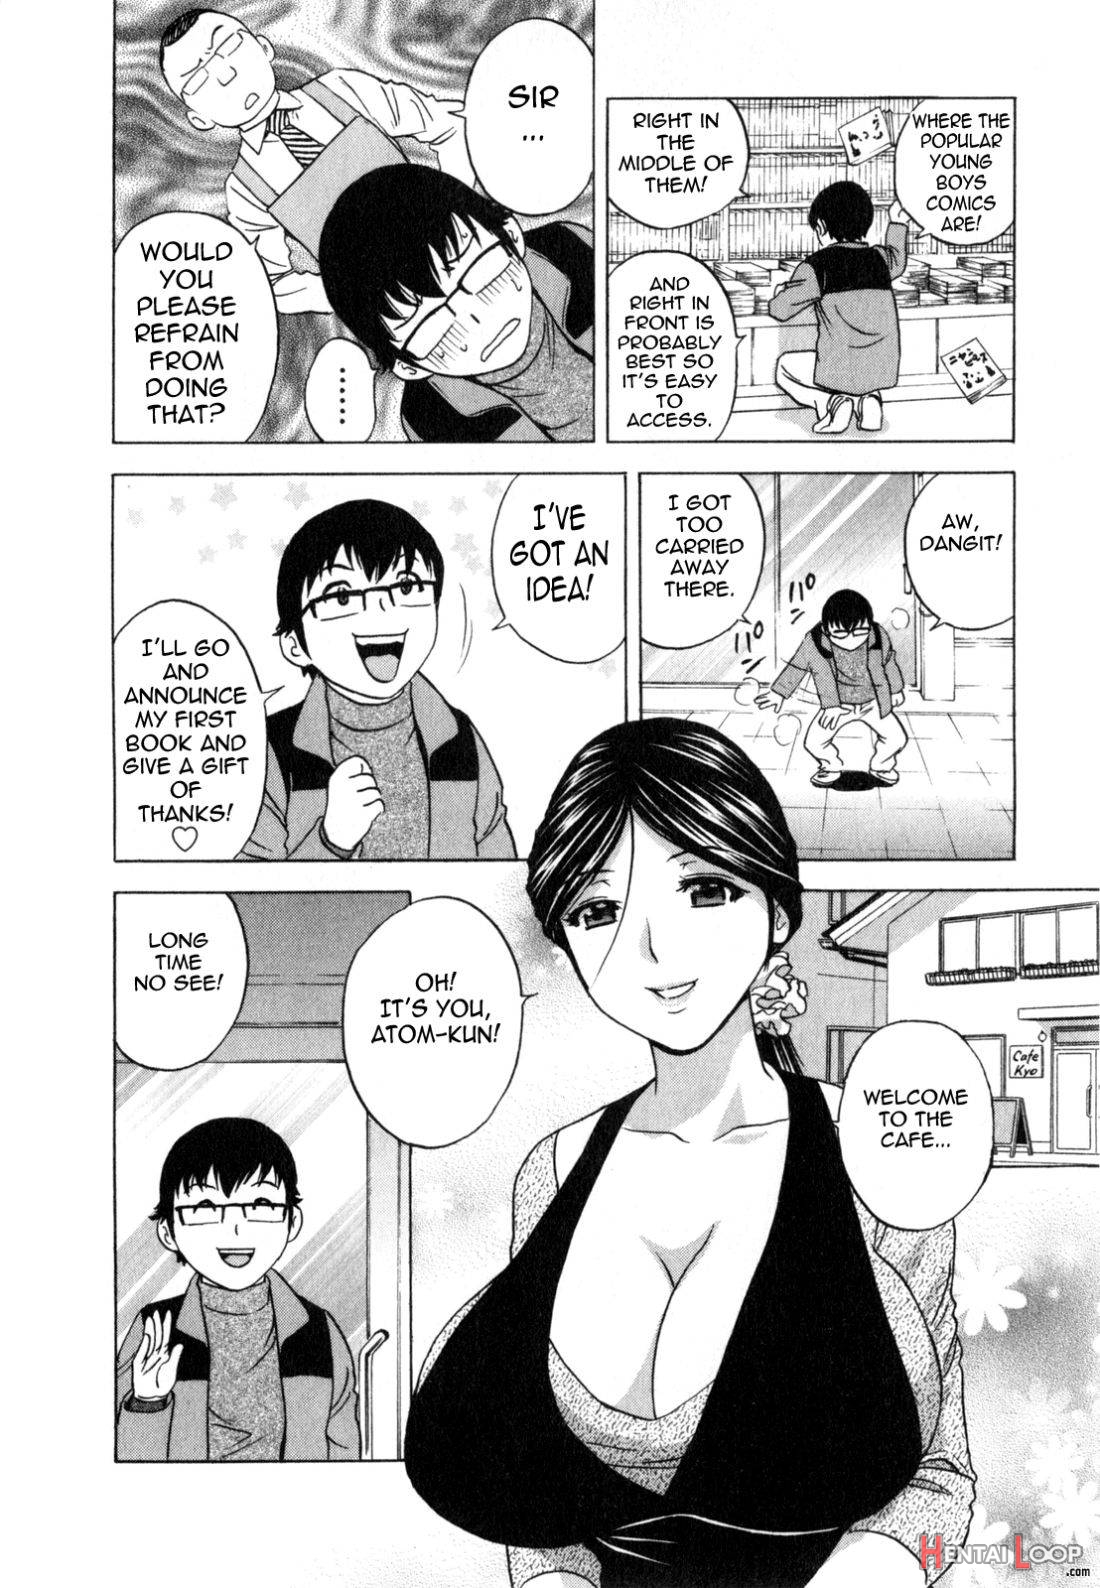 Life With Married Women Just Like A Manga 3 page 10